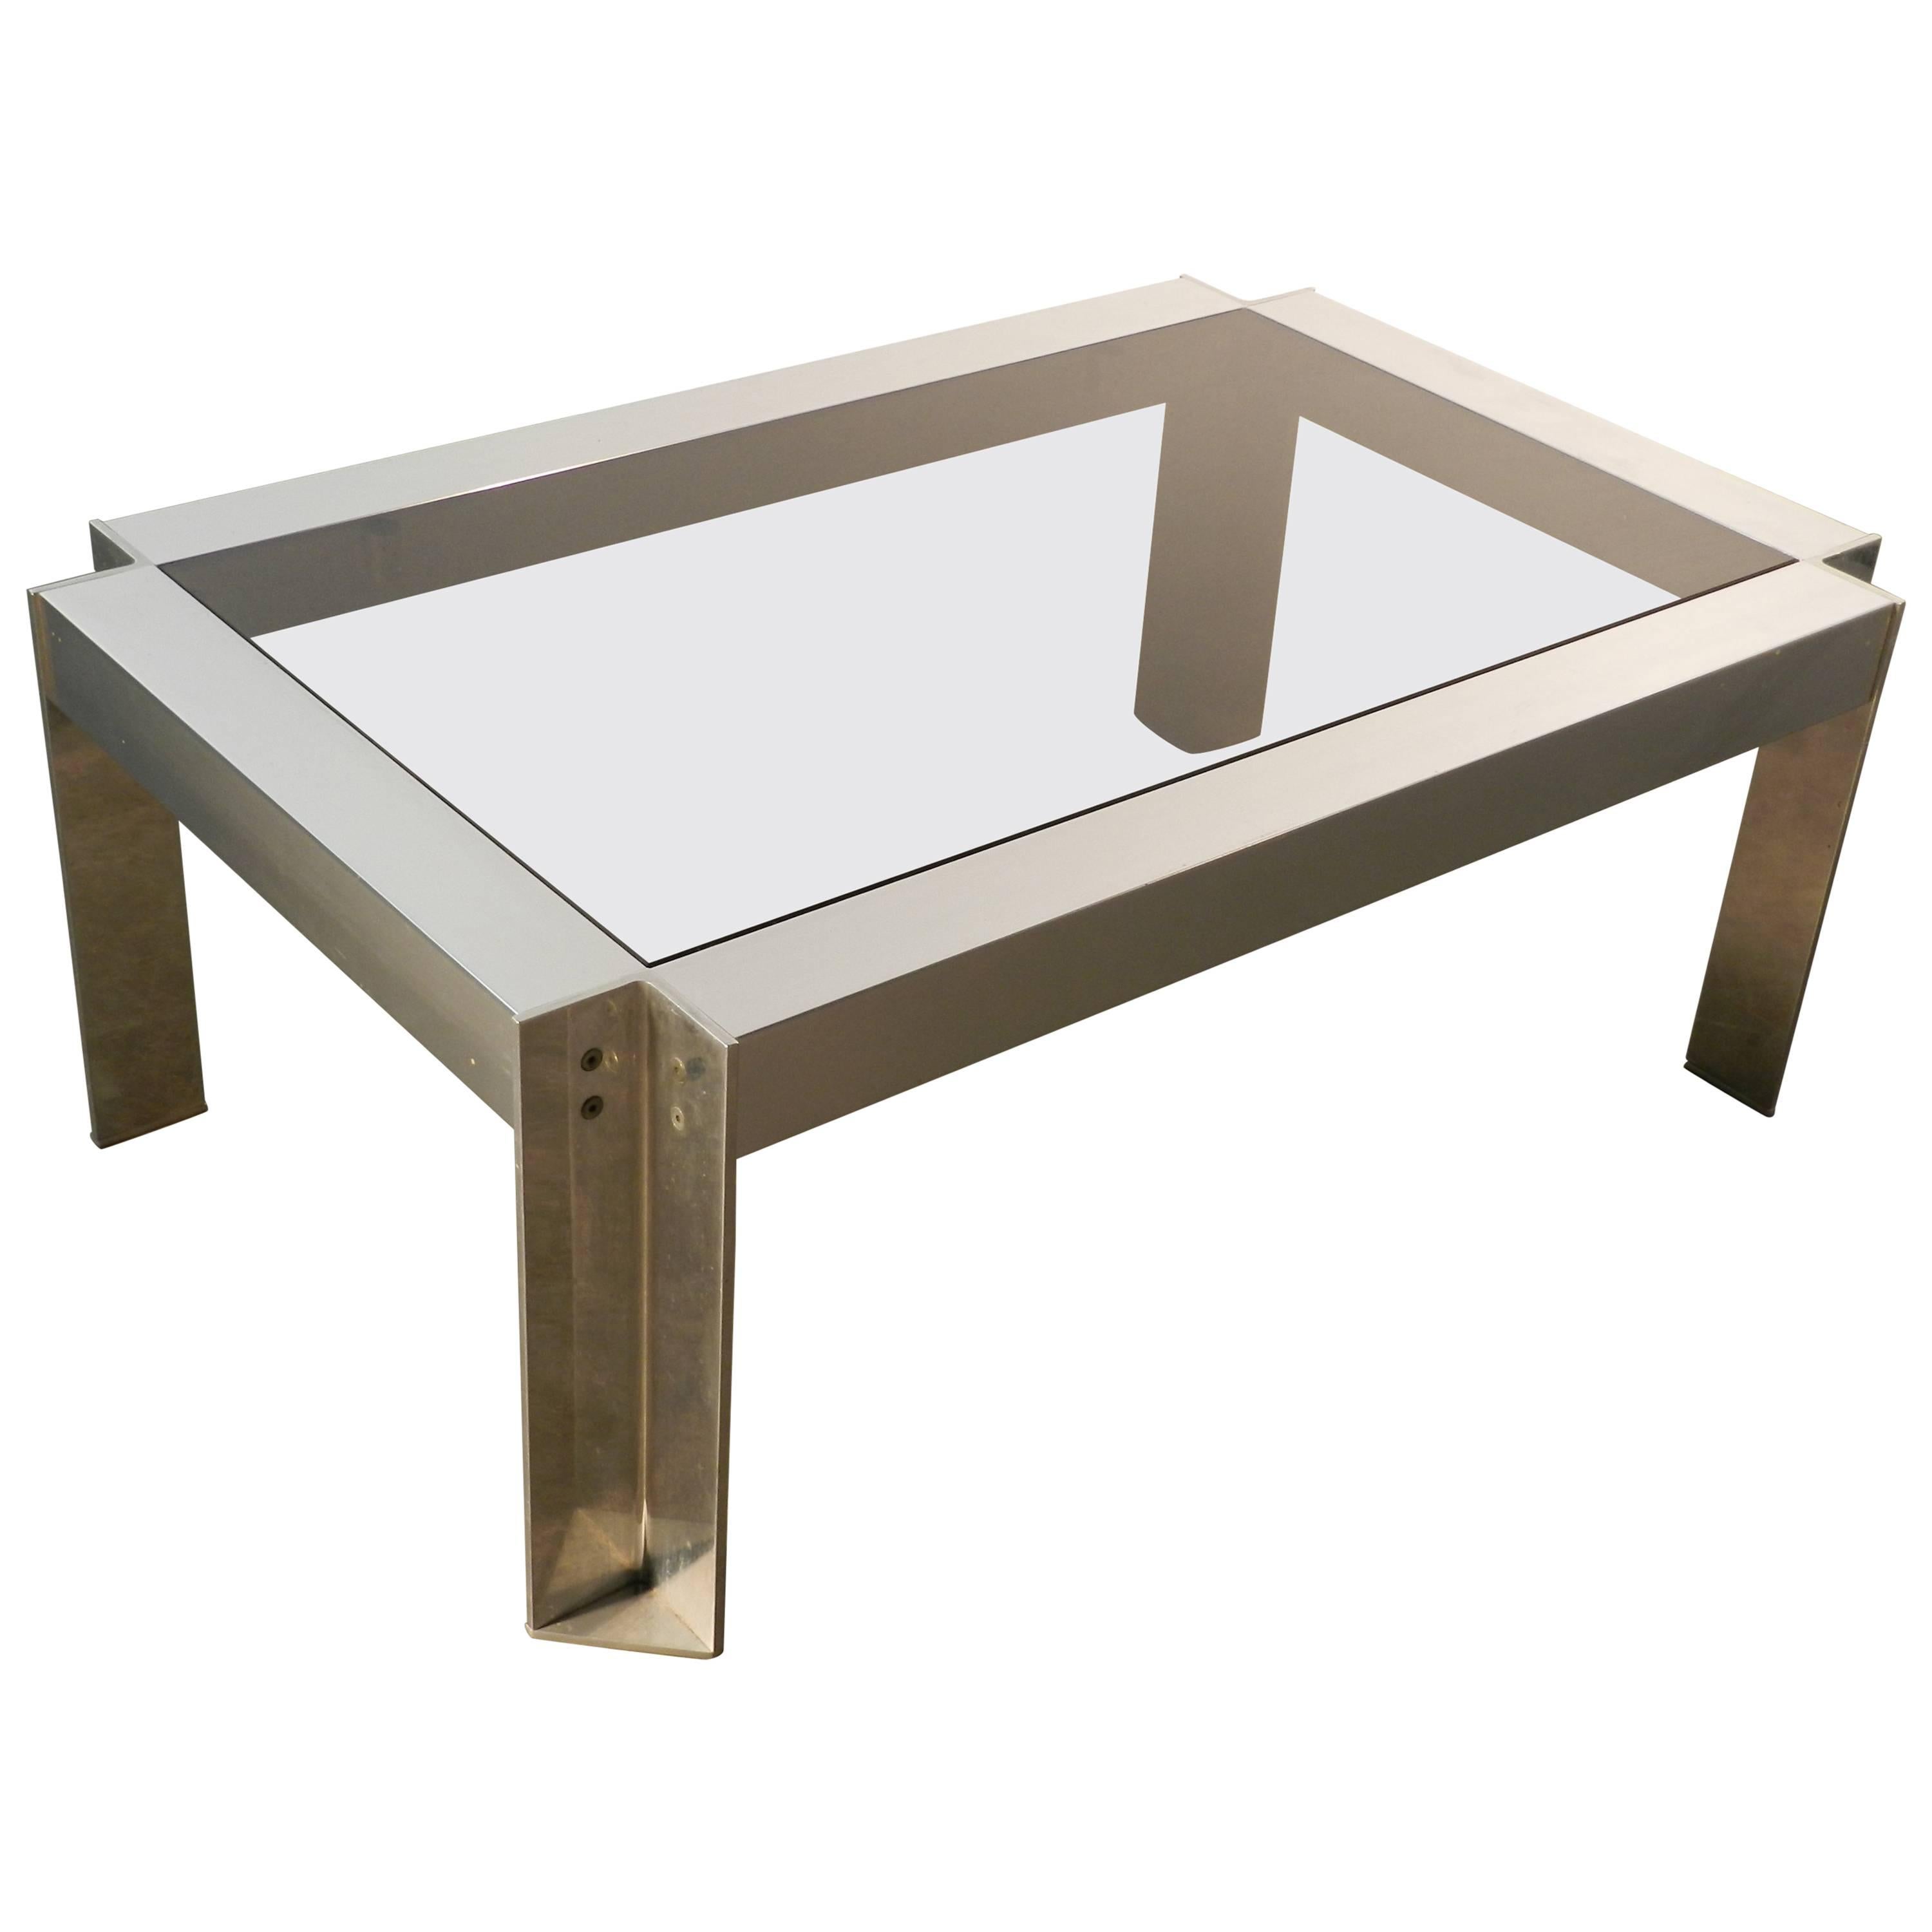 Georges Frydman, Coffee Table in Brushed Steel, Edition E.F.A